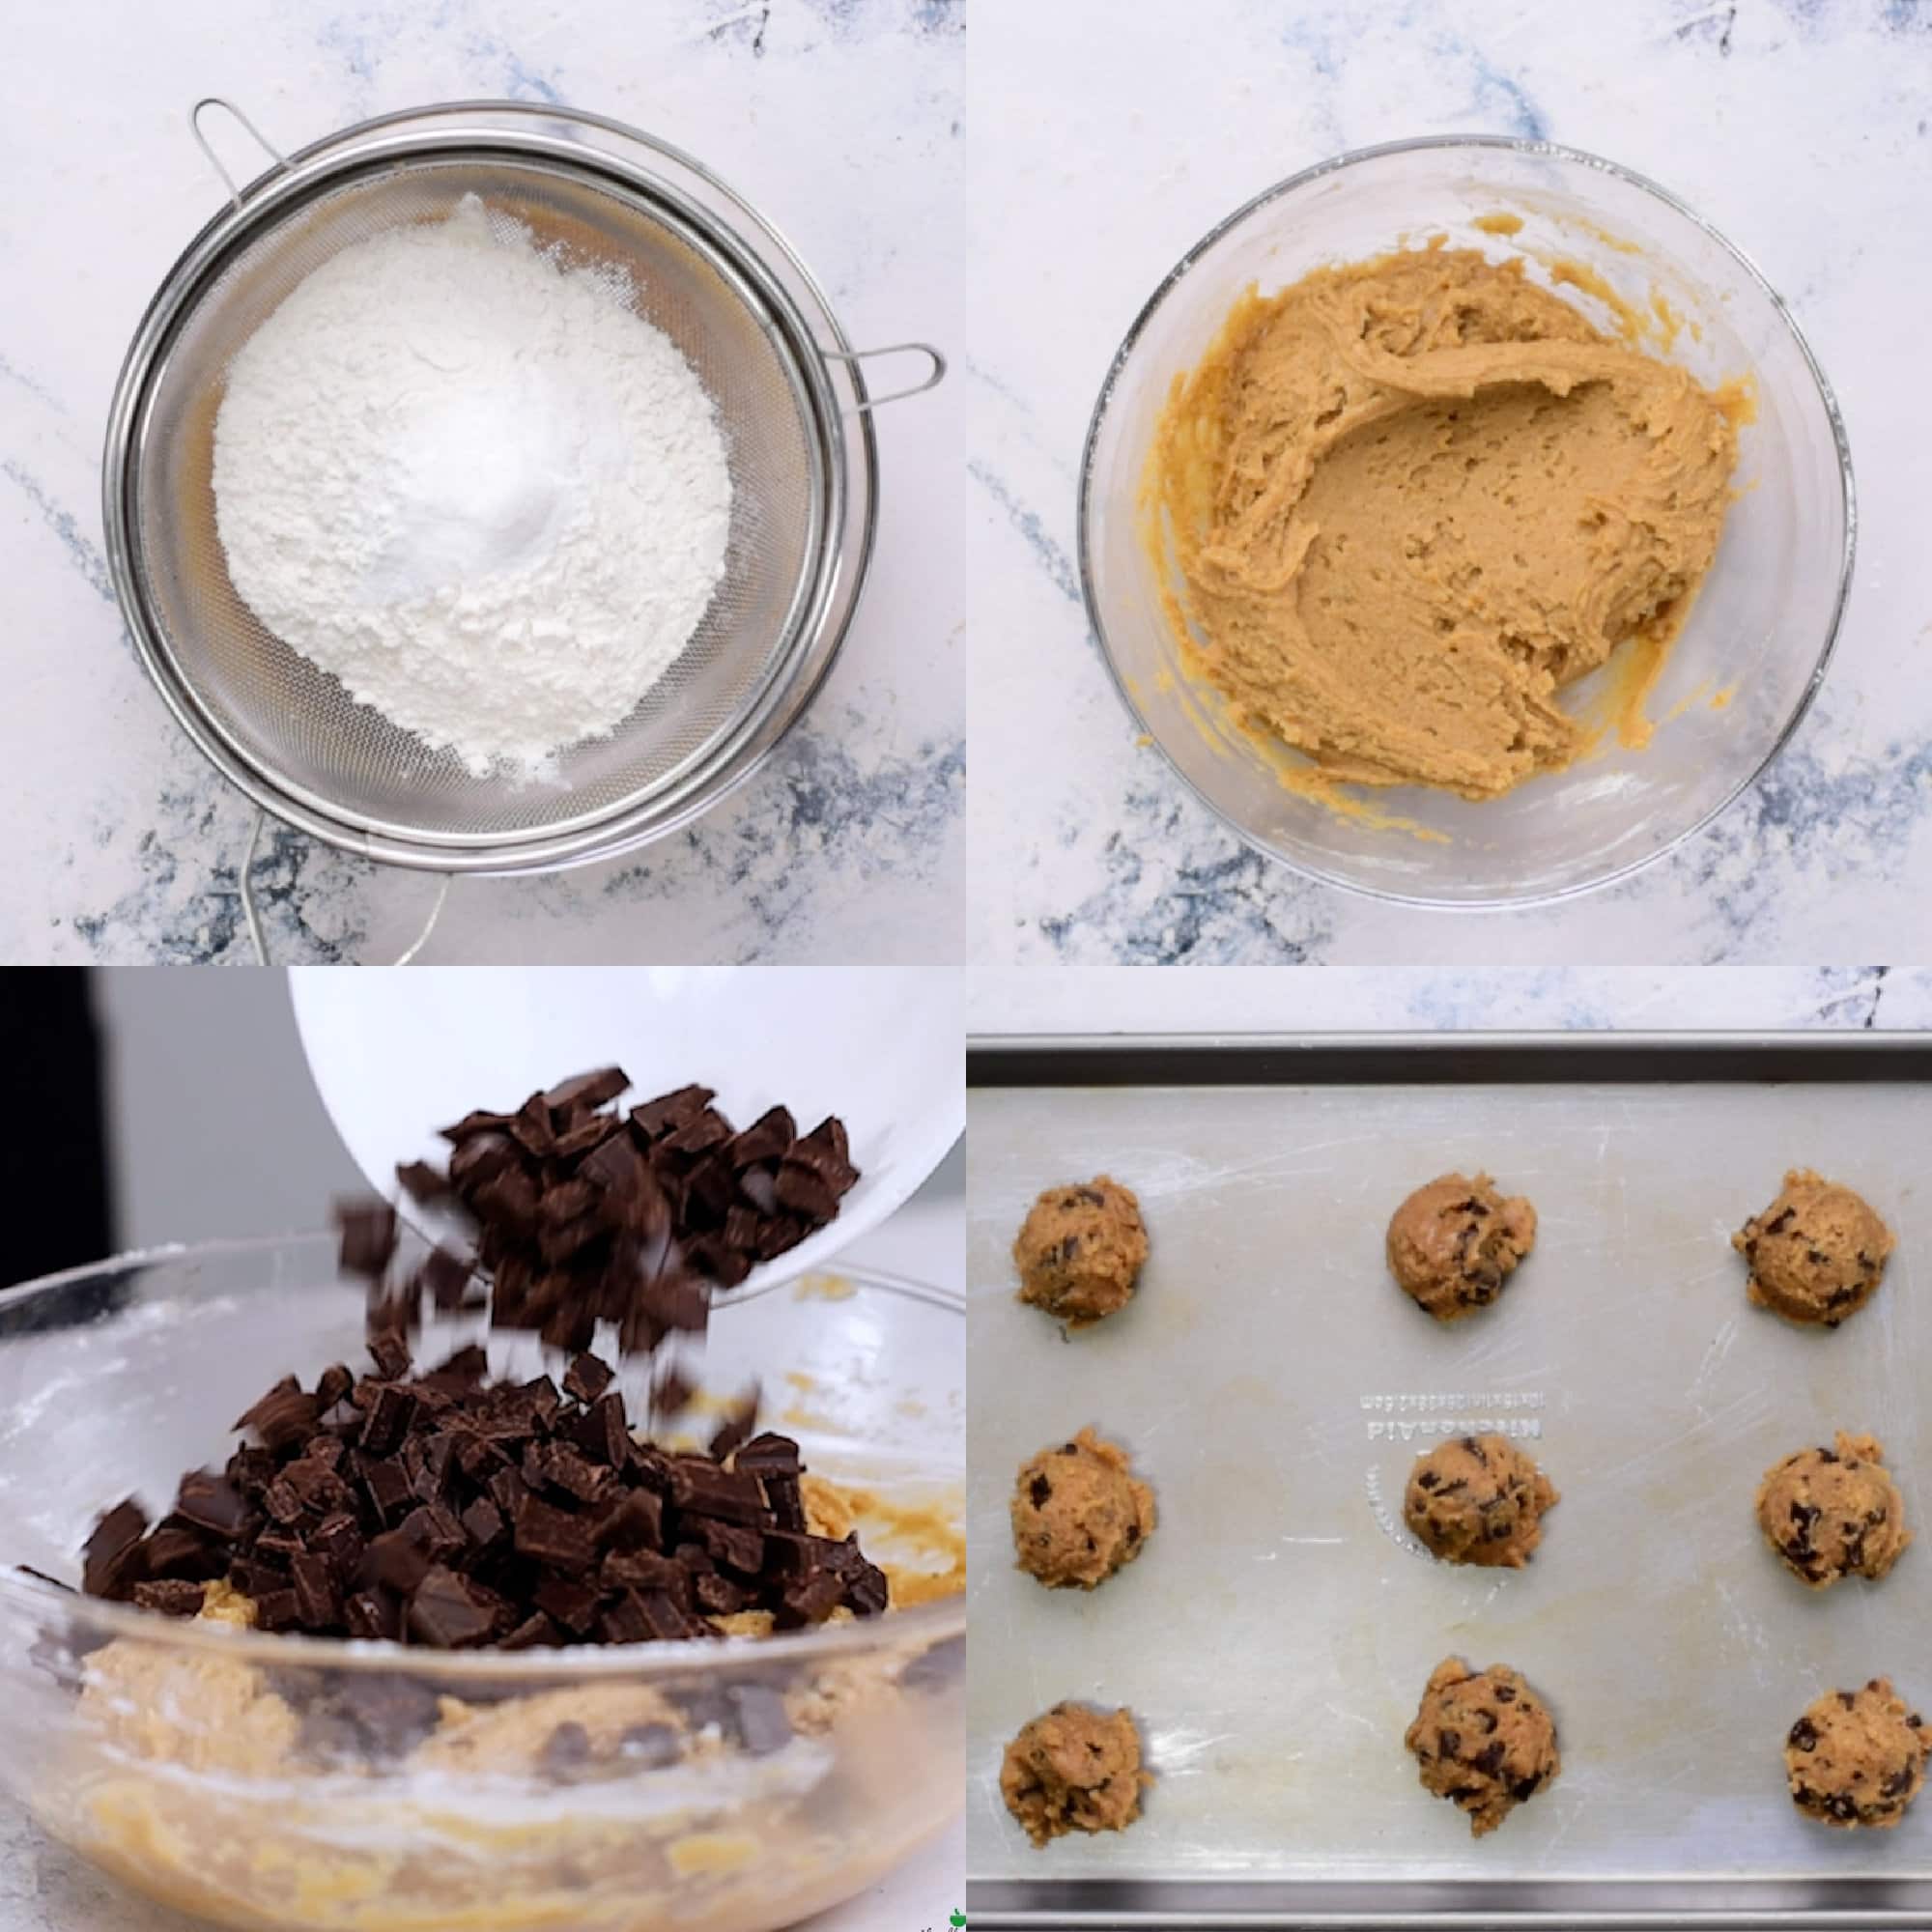 Brown Butter Chocolate Chip Cookies - Mix the dry ingredients to the wet mixture. Fold in the chocolate chunks. Using a cookie scoop portion the dough. 